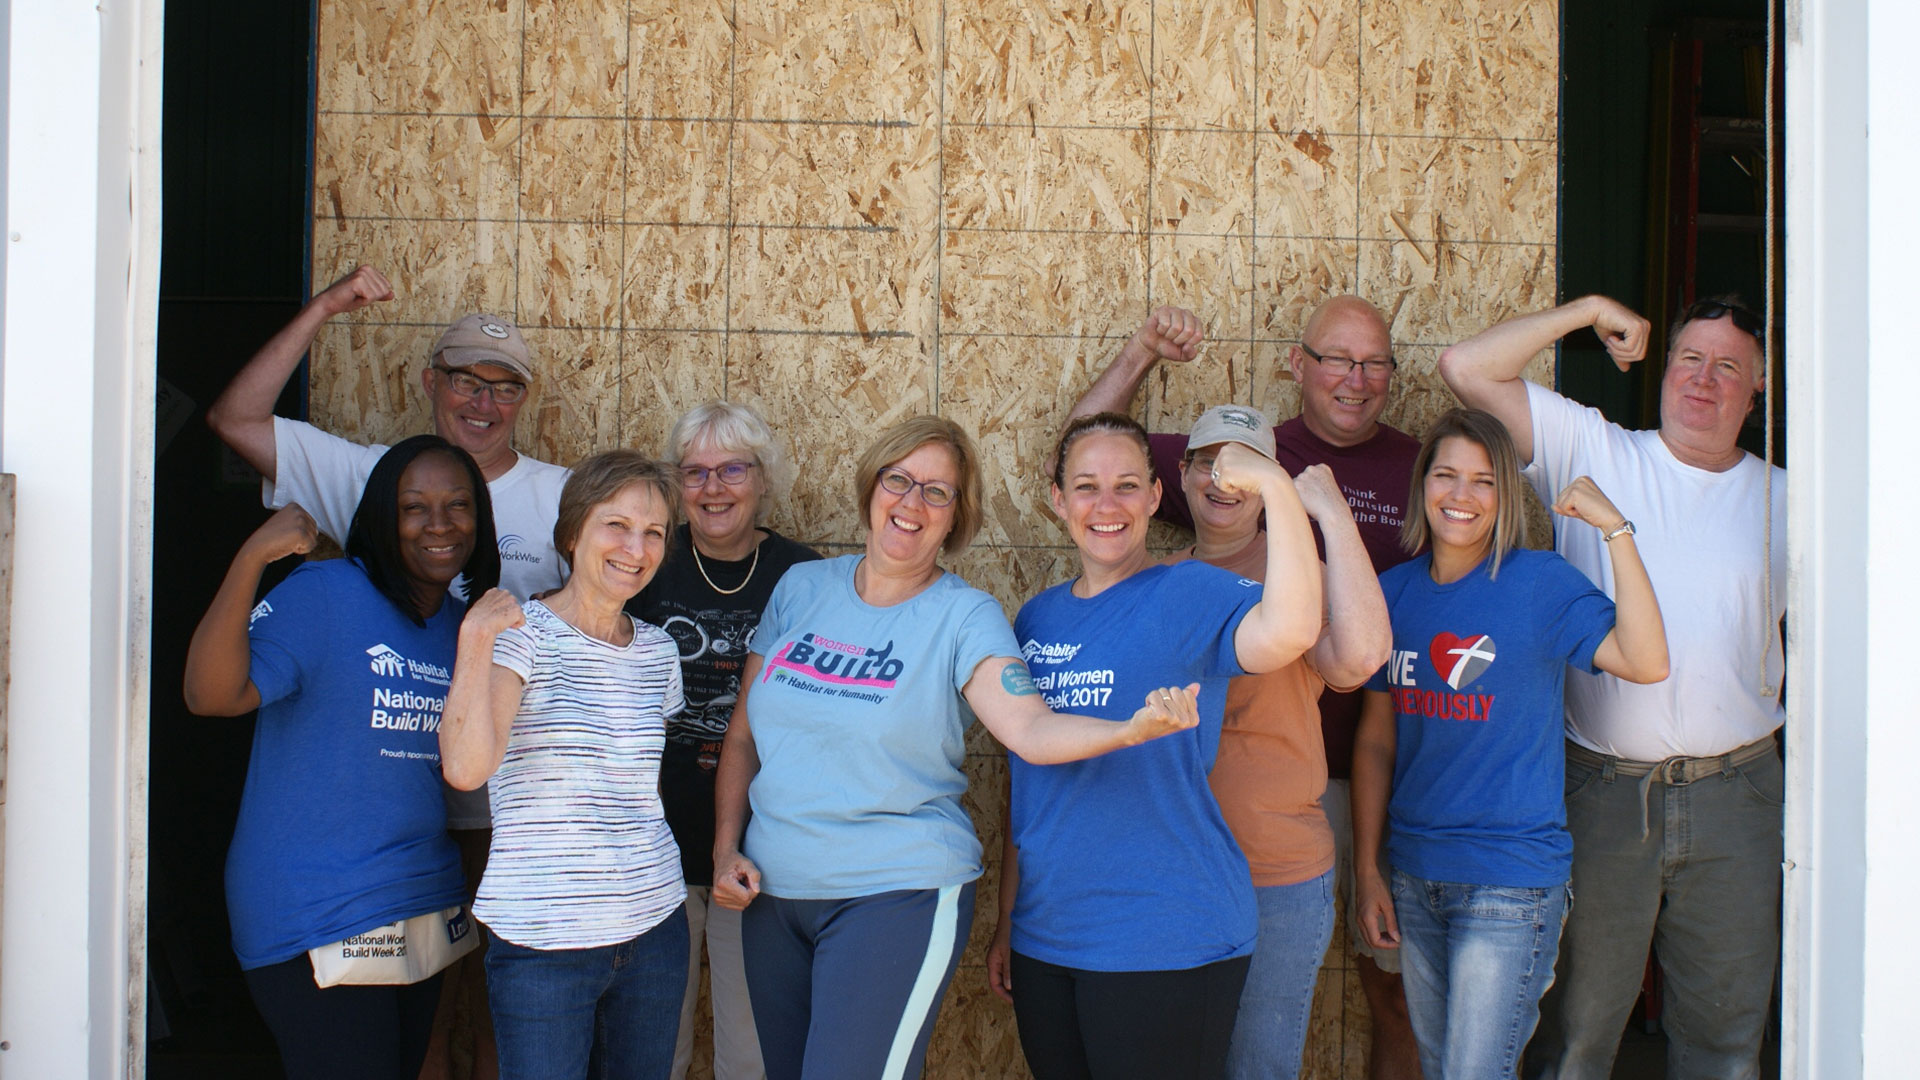 Habitat for Humanity volunteers are flexing their biceps showing they are strong.